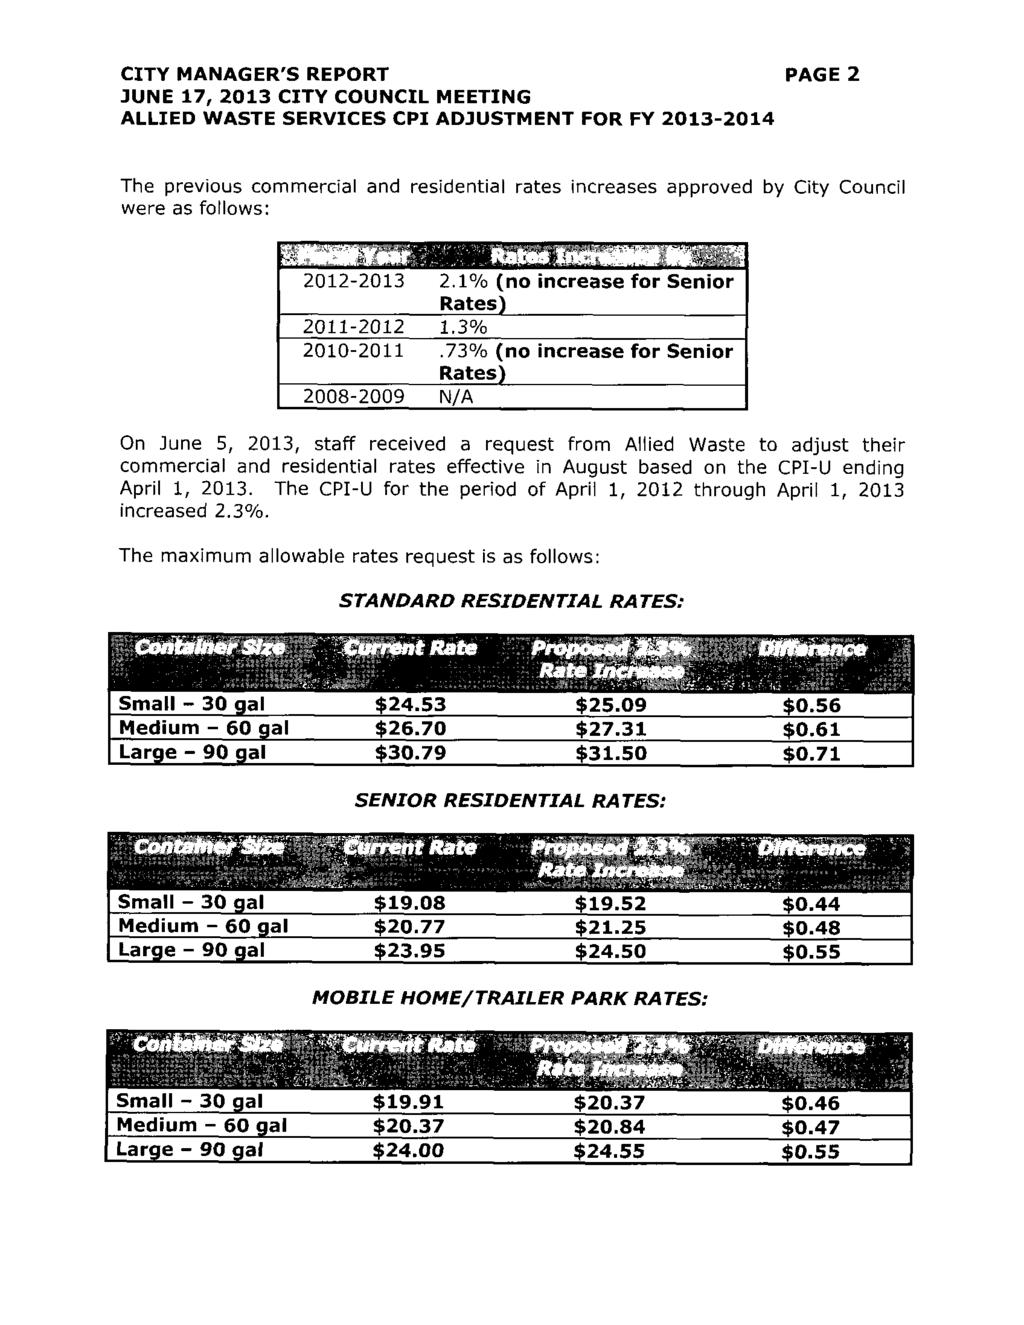 CITY MANAGER S REPORT PAGE 2 UNE 17 2013 CITY COUNCIL MEETING ALLIED WASTE SERVICES CPI AD USTMENT FOR FY 2013 2014 The previous commercial and residential rates increases approved by City Council